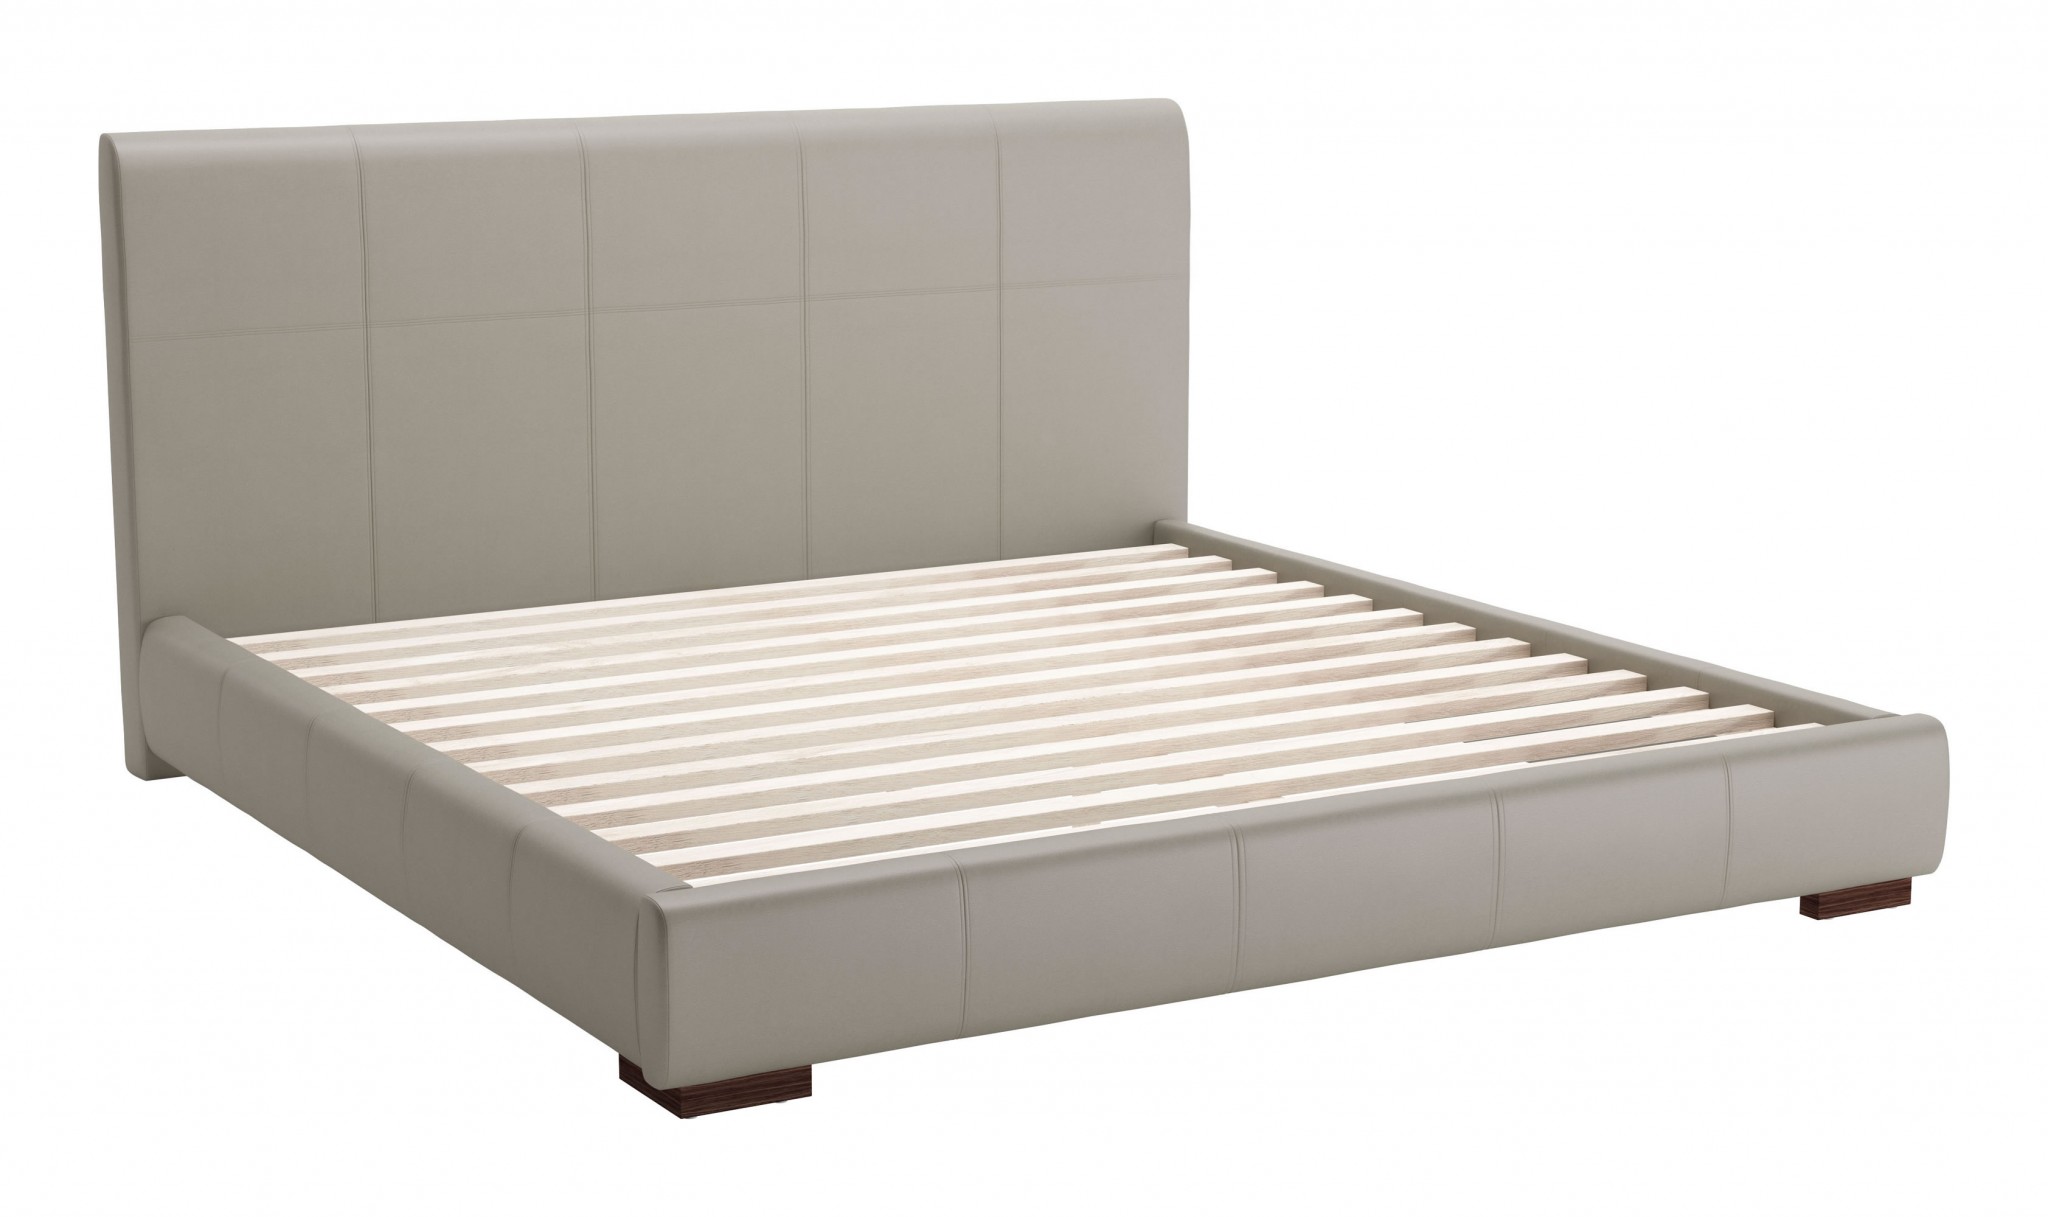 83.9" x 88.6" x 43.5" Gray, Leatherette, Plywood, MDF, King Bed